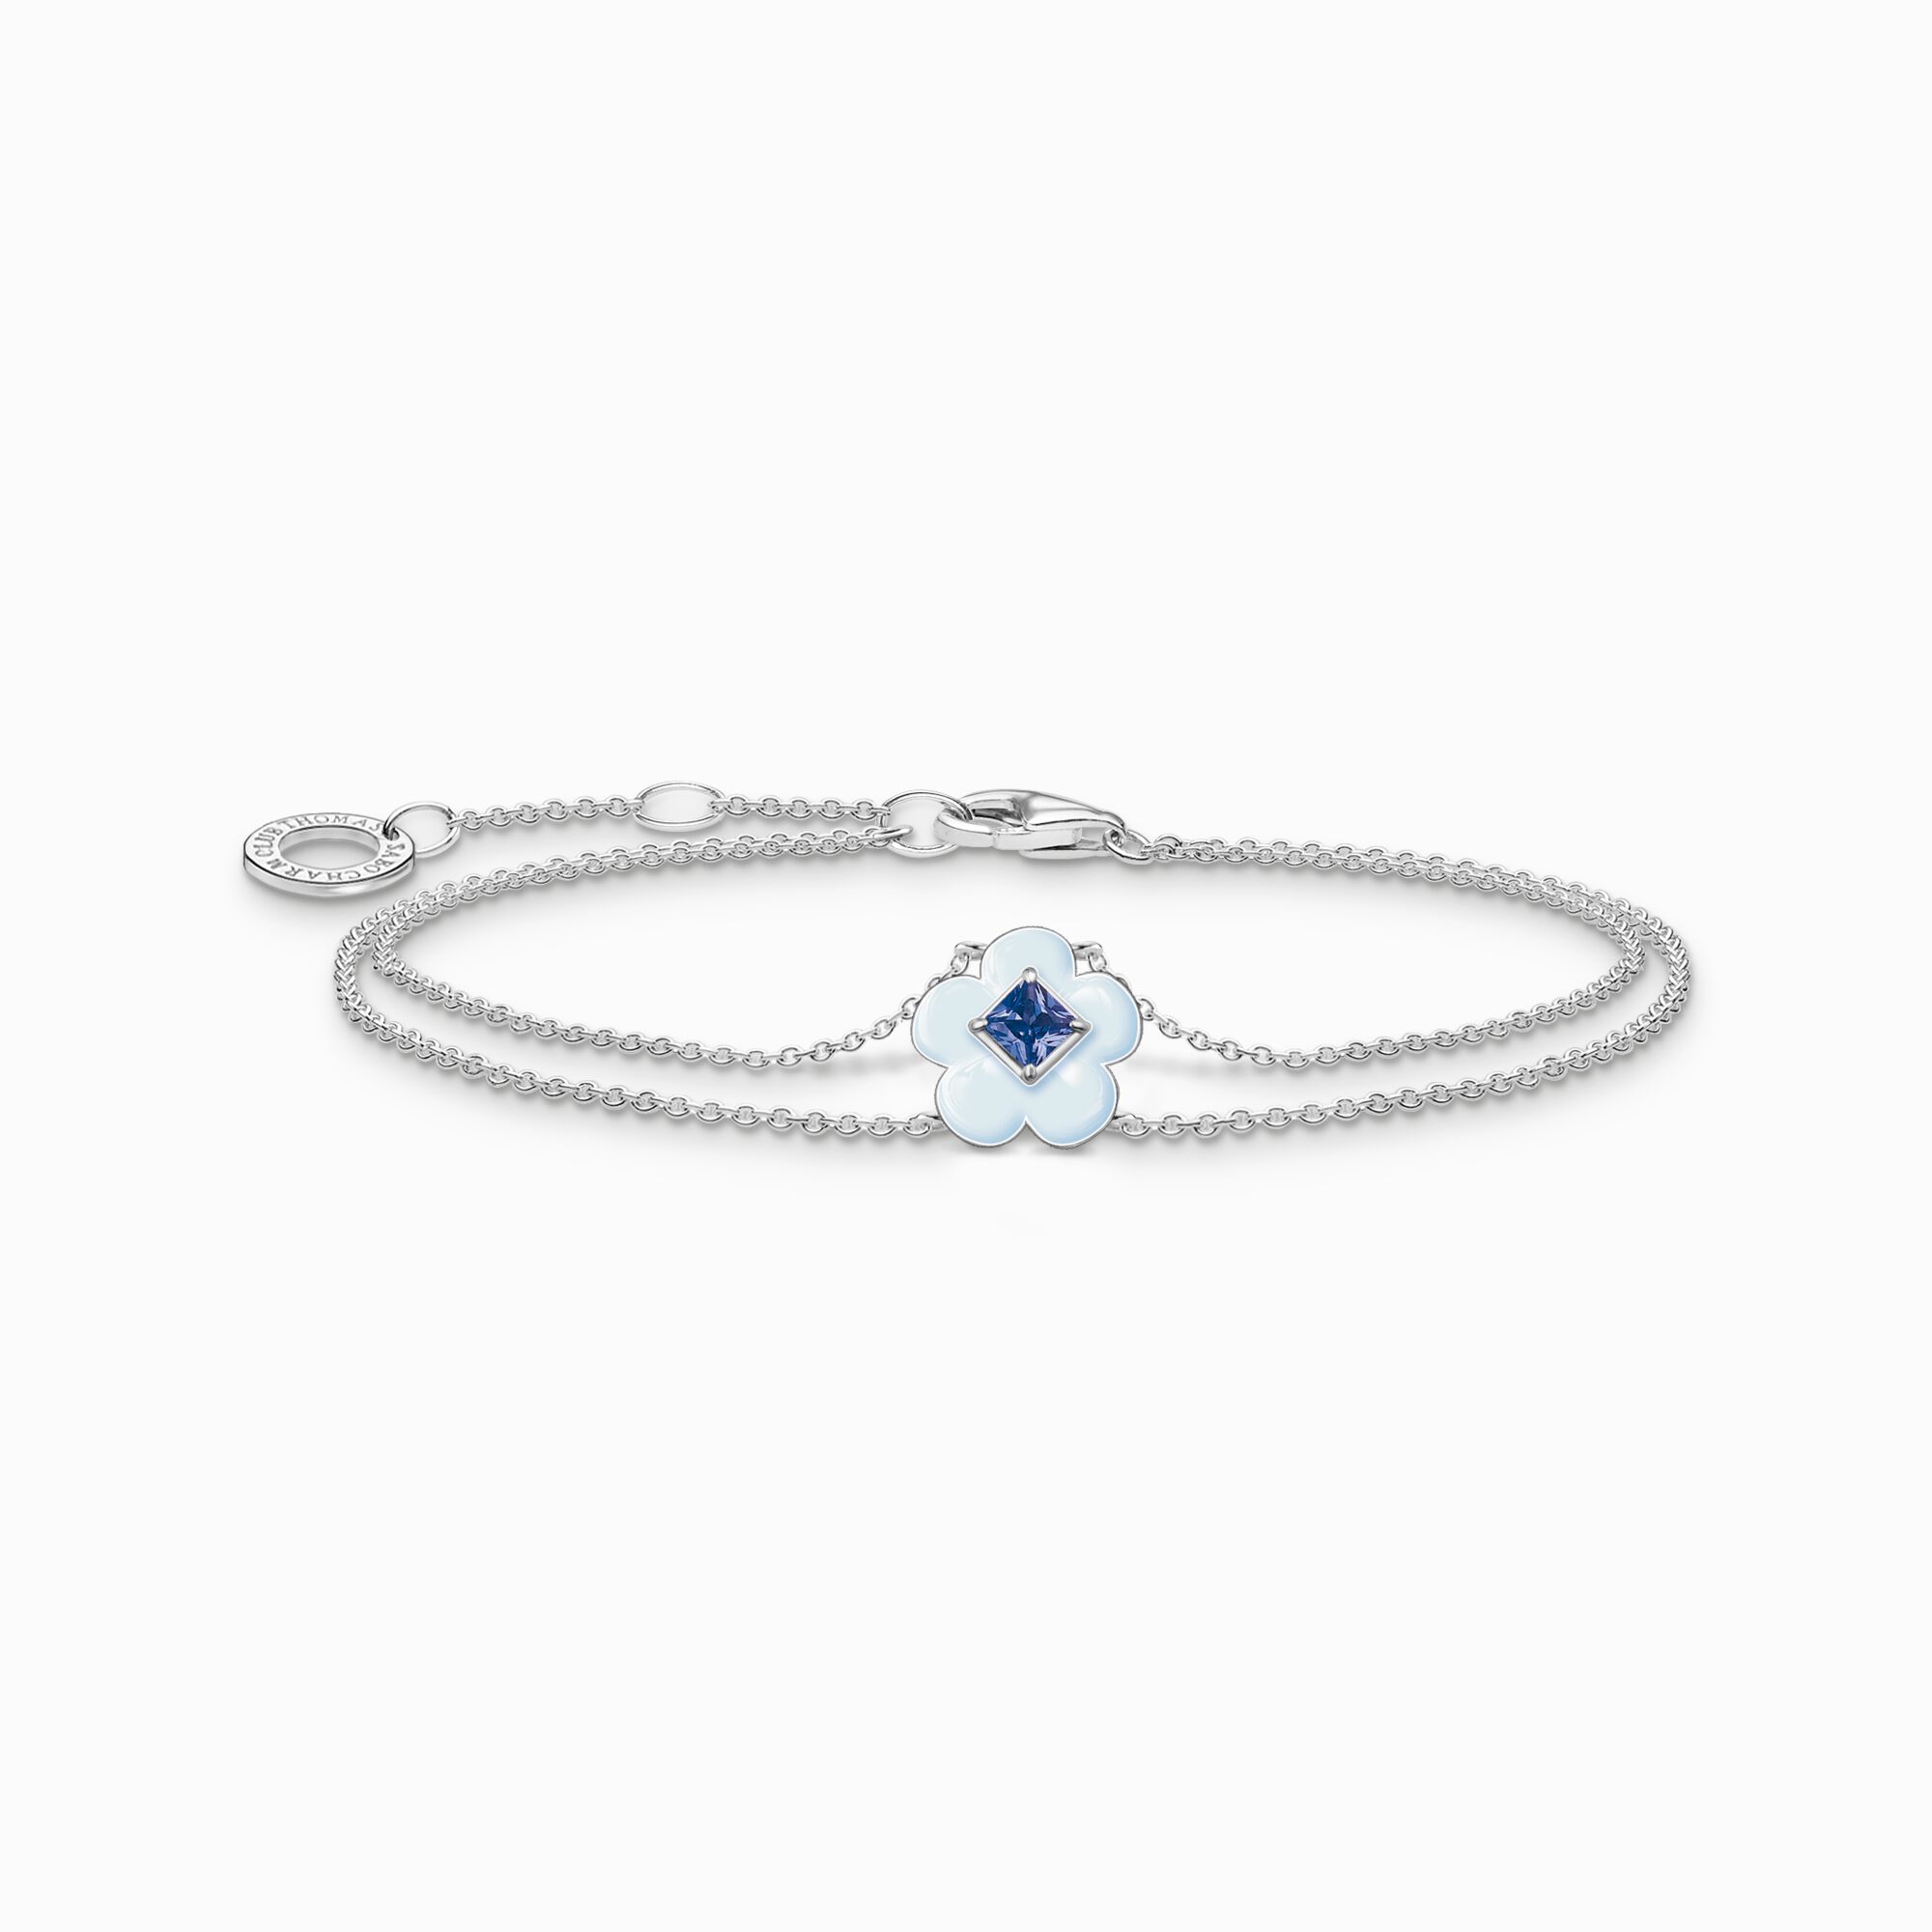 Bracelet flower with blue stone silver from the Charming Collection collection in the THOMAS SABO online store